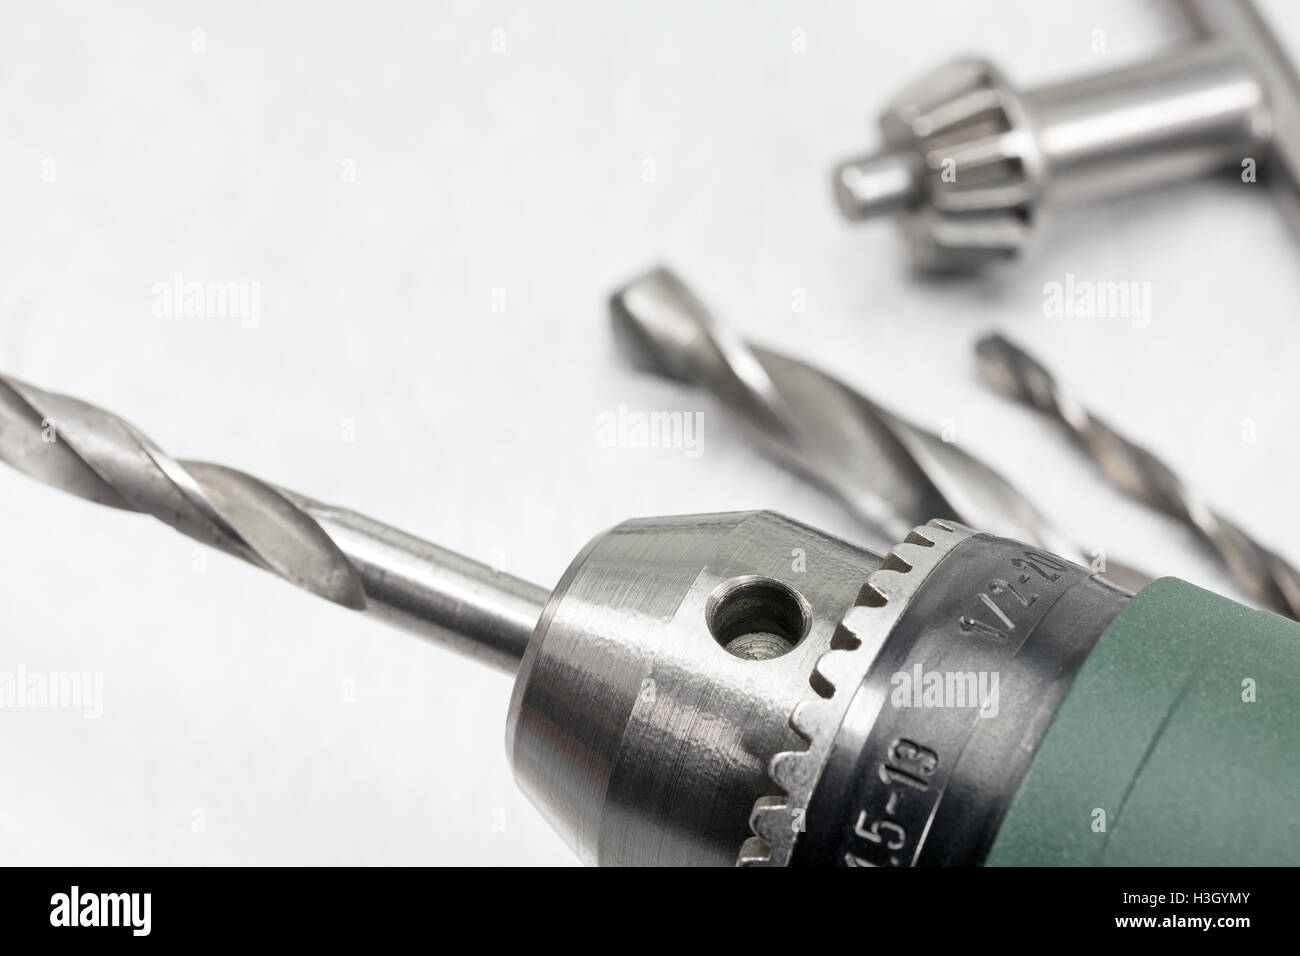 Electric drill head with drill bits and drill key on scratched metal background Stock Photo